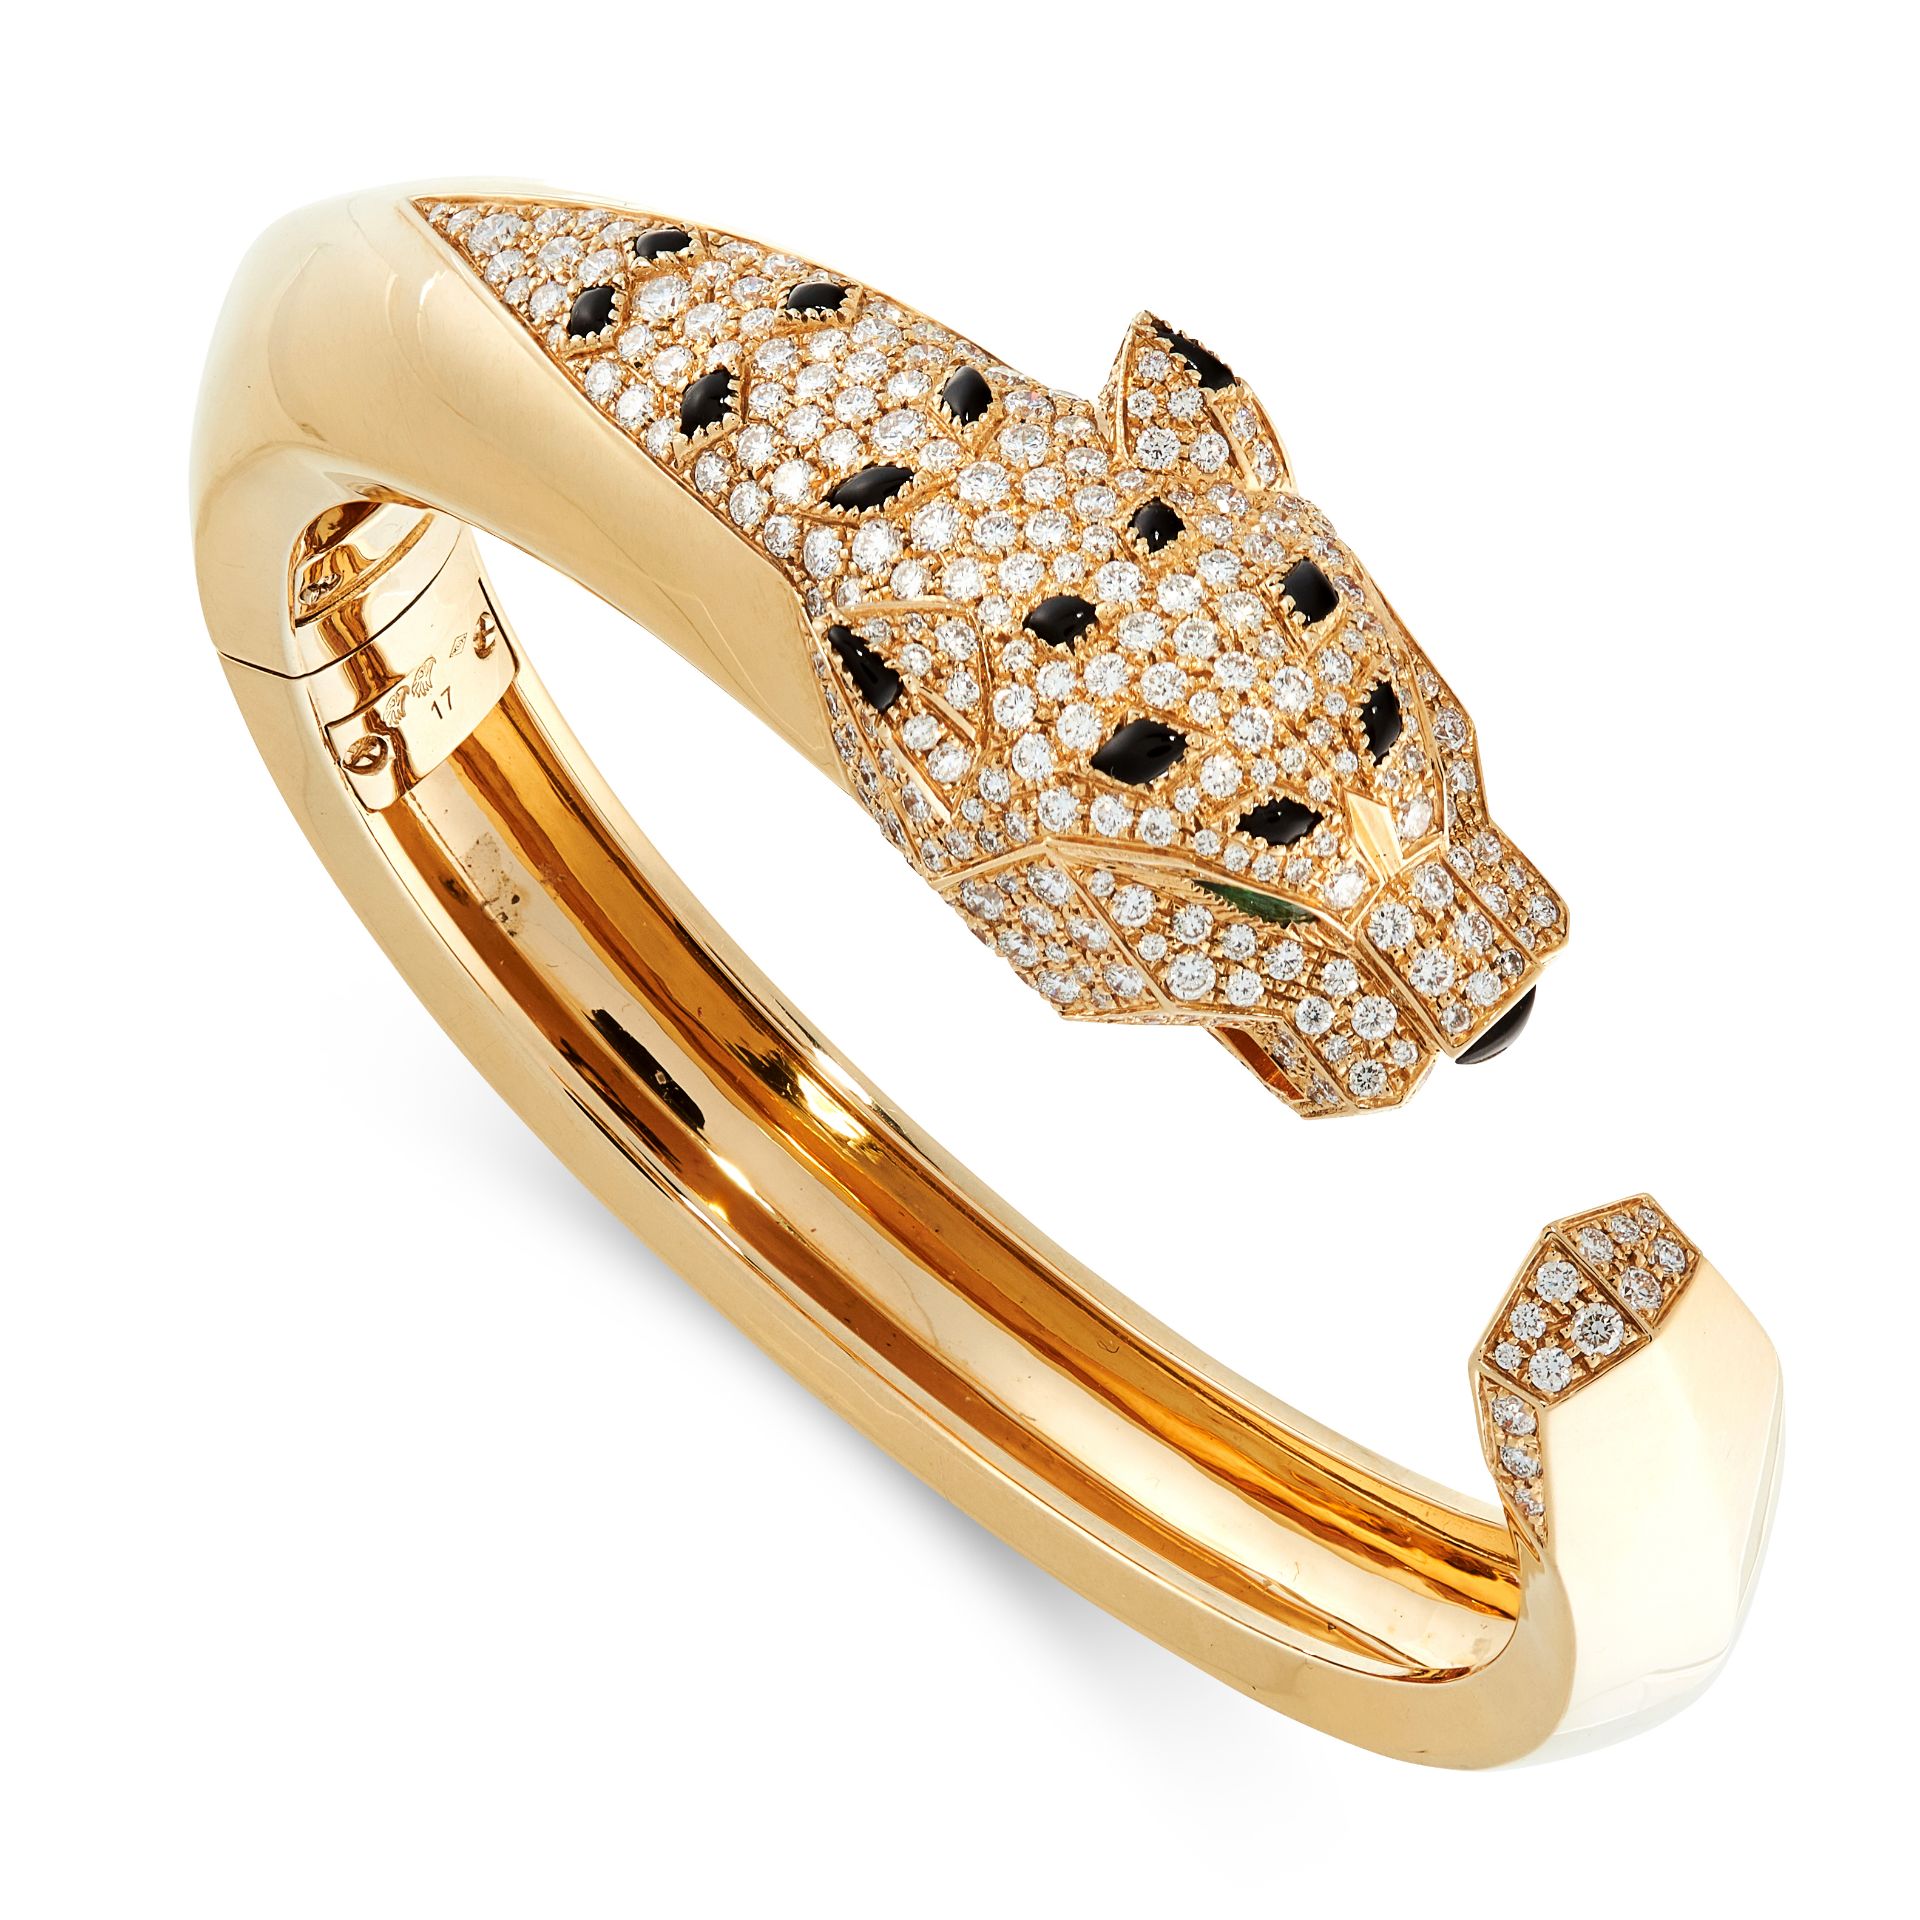 A DIAMOND, ONYX AND EMERALD PANTHER BANGLE in 18ct yellow gold, designed as a coiled panther, set...